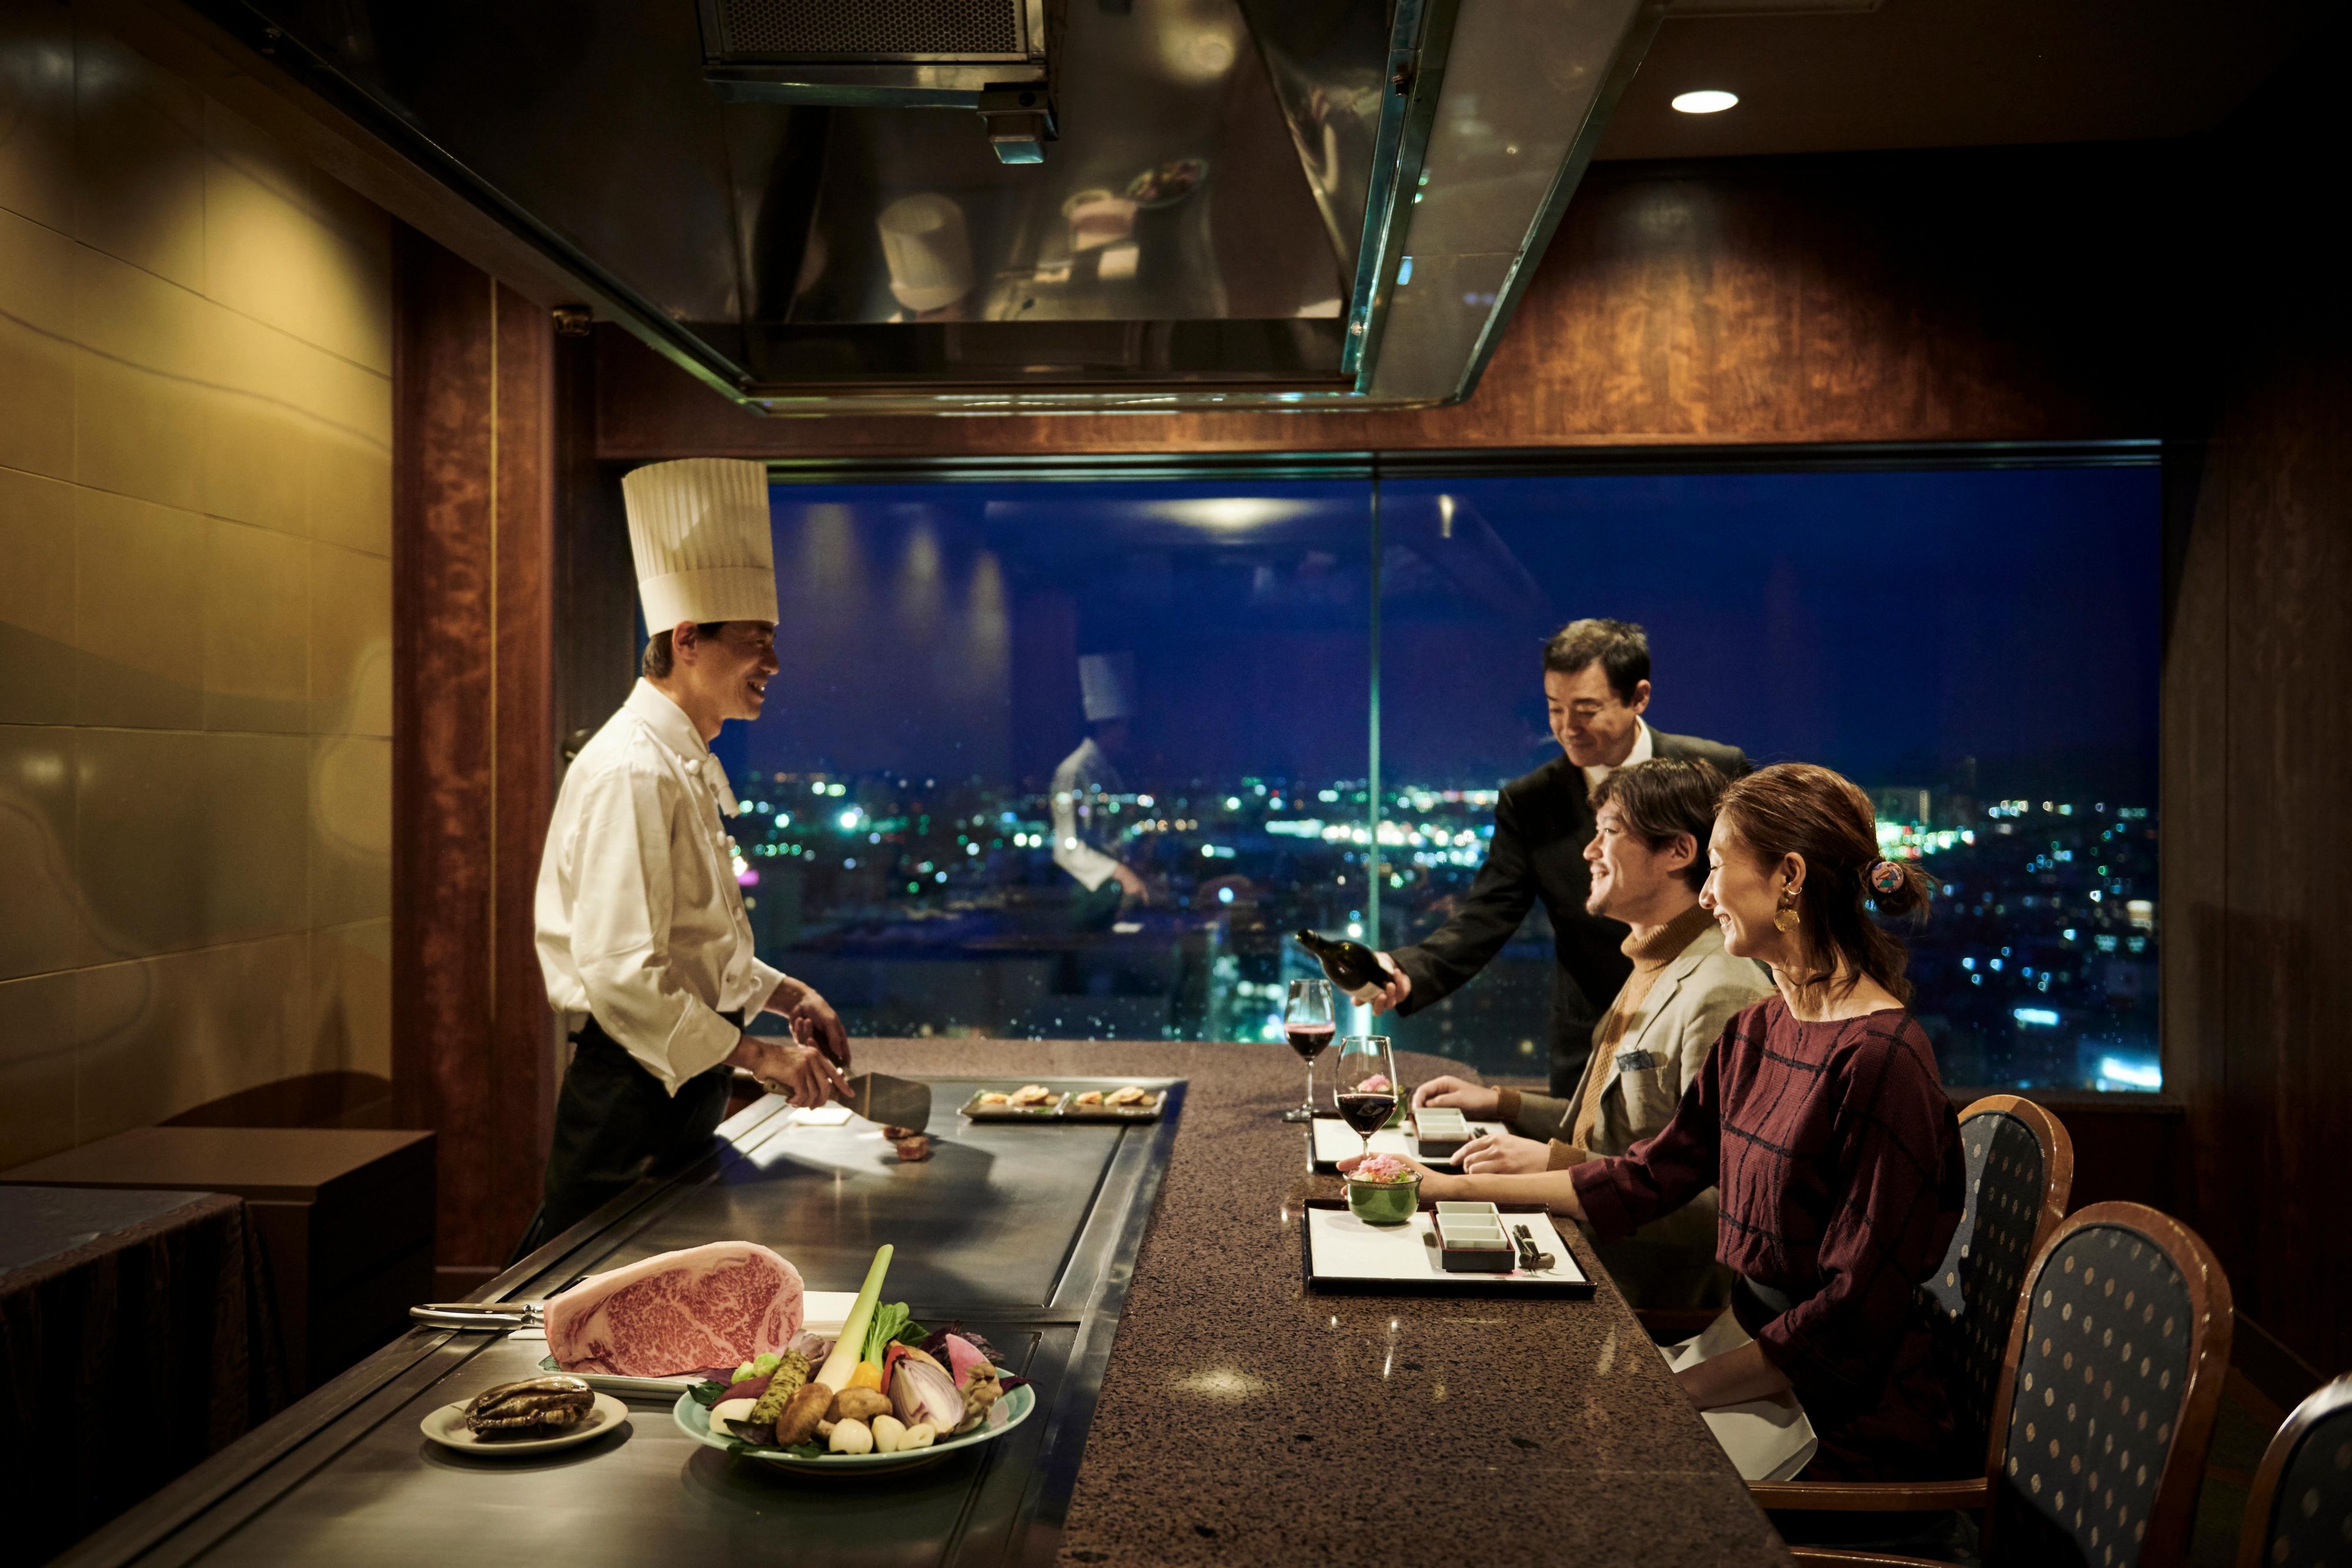 KAGA offers teppanyaki, which is prepared right in front you.